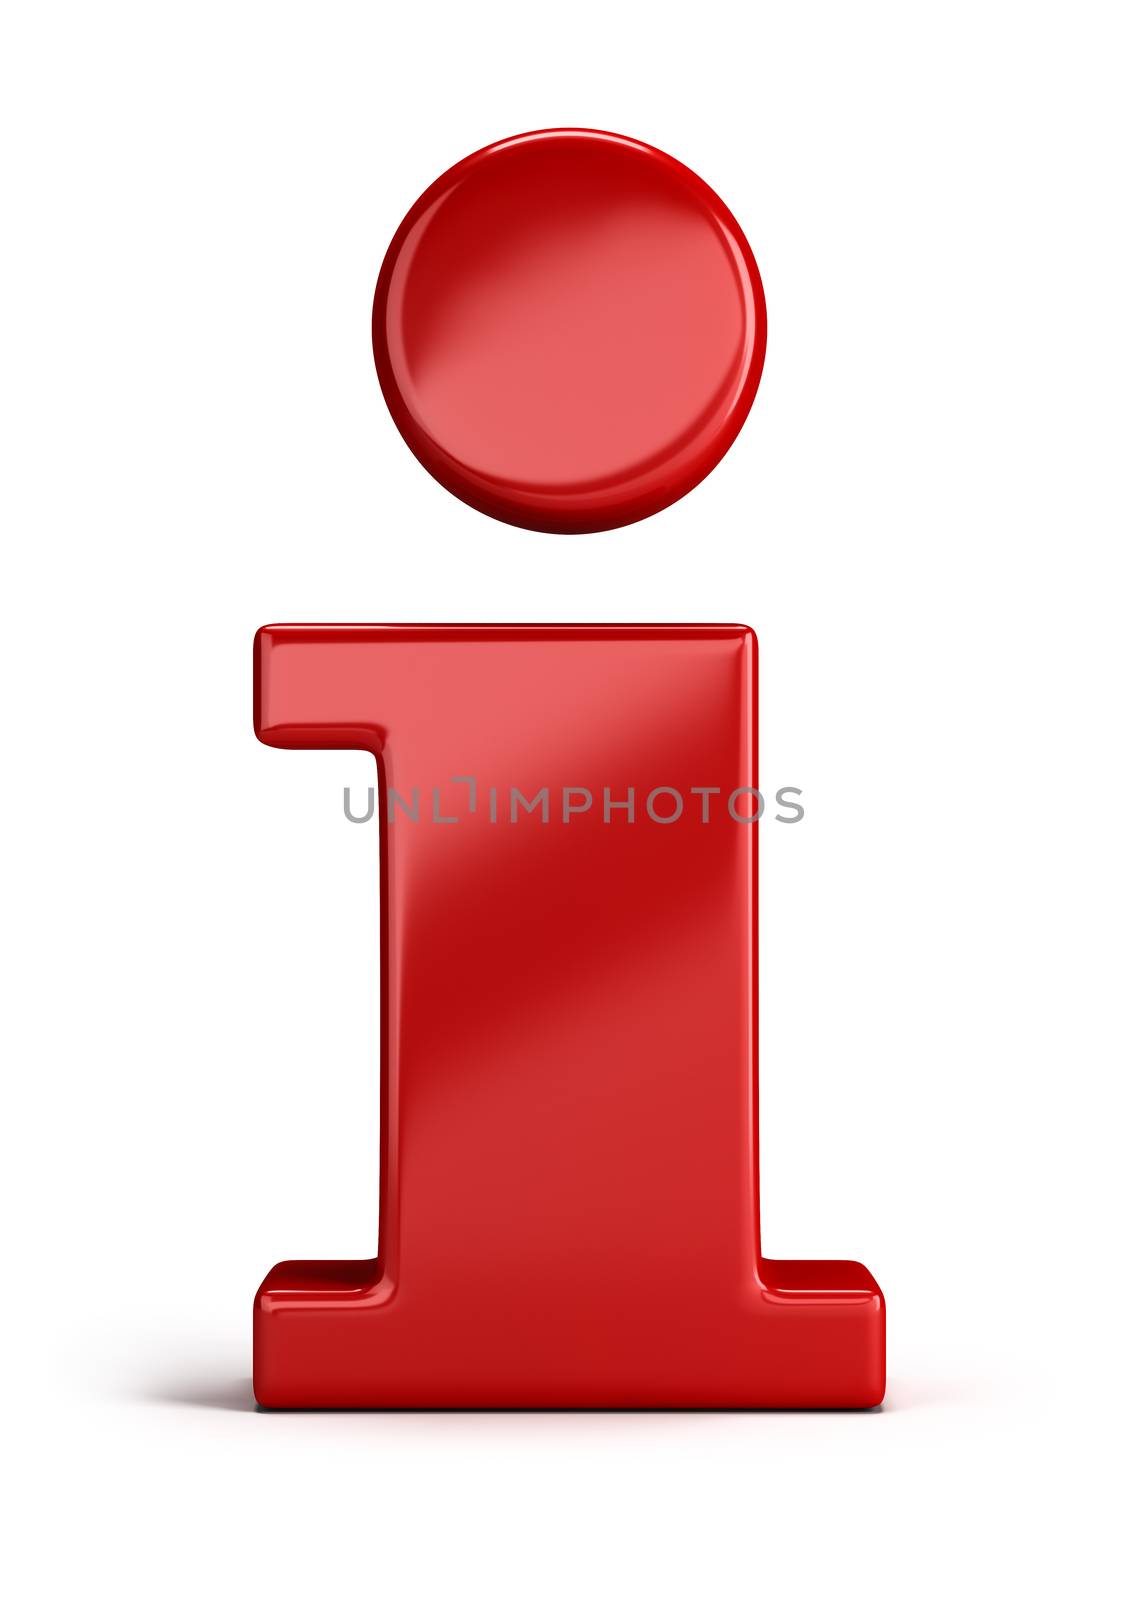 Red info icon. 3d image. Isolated white background.